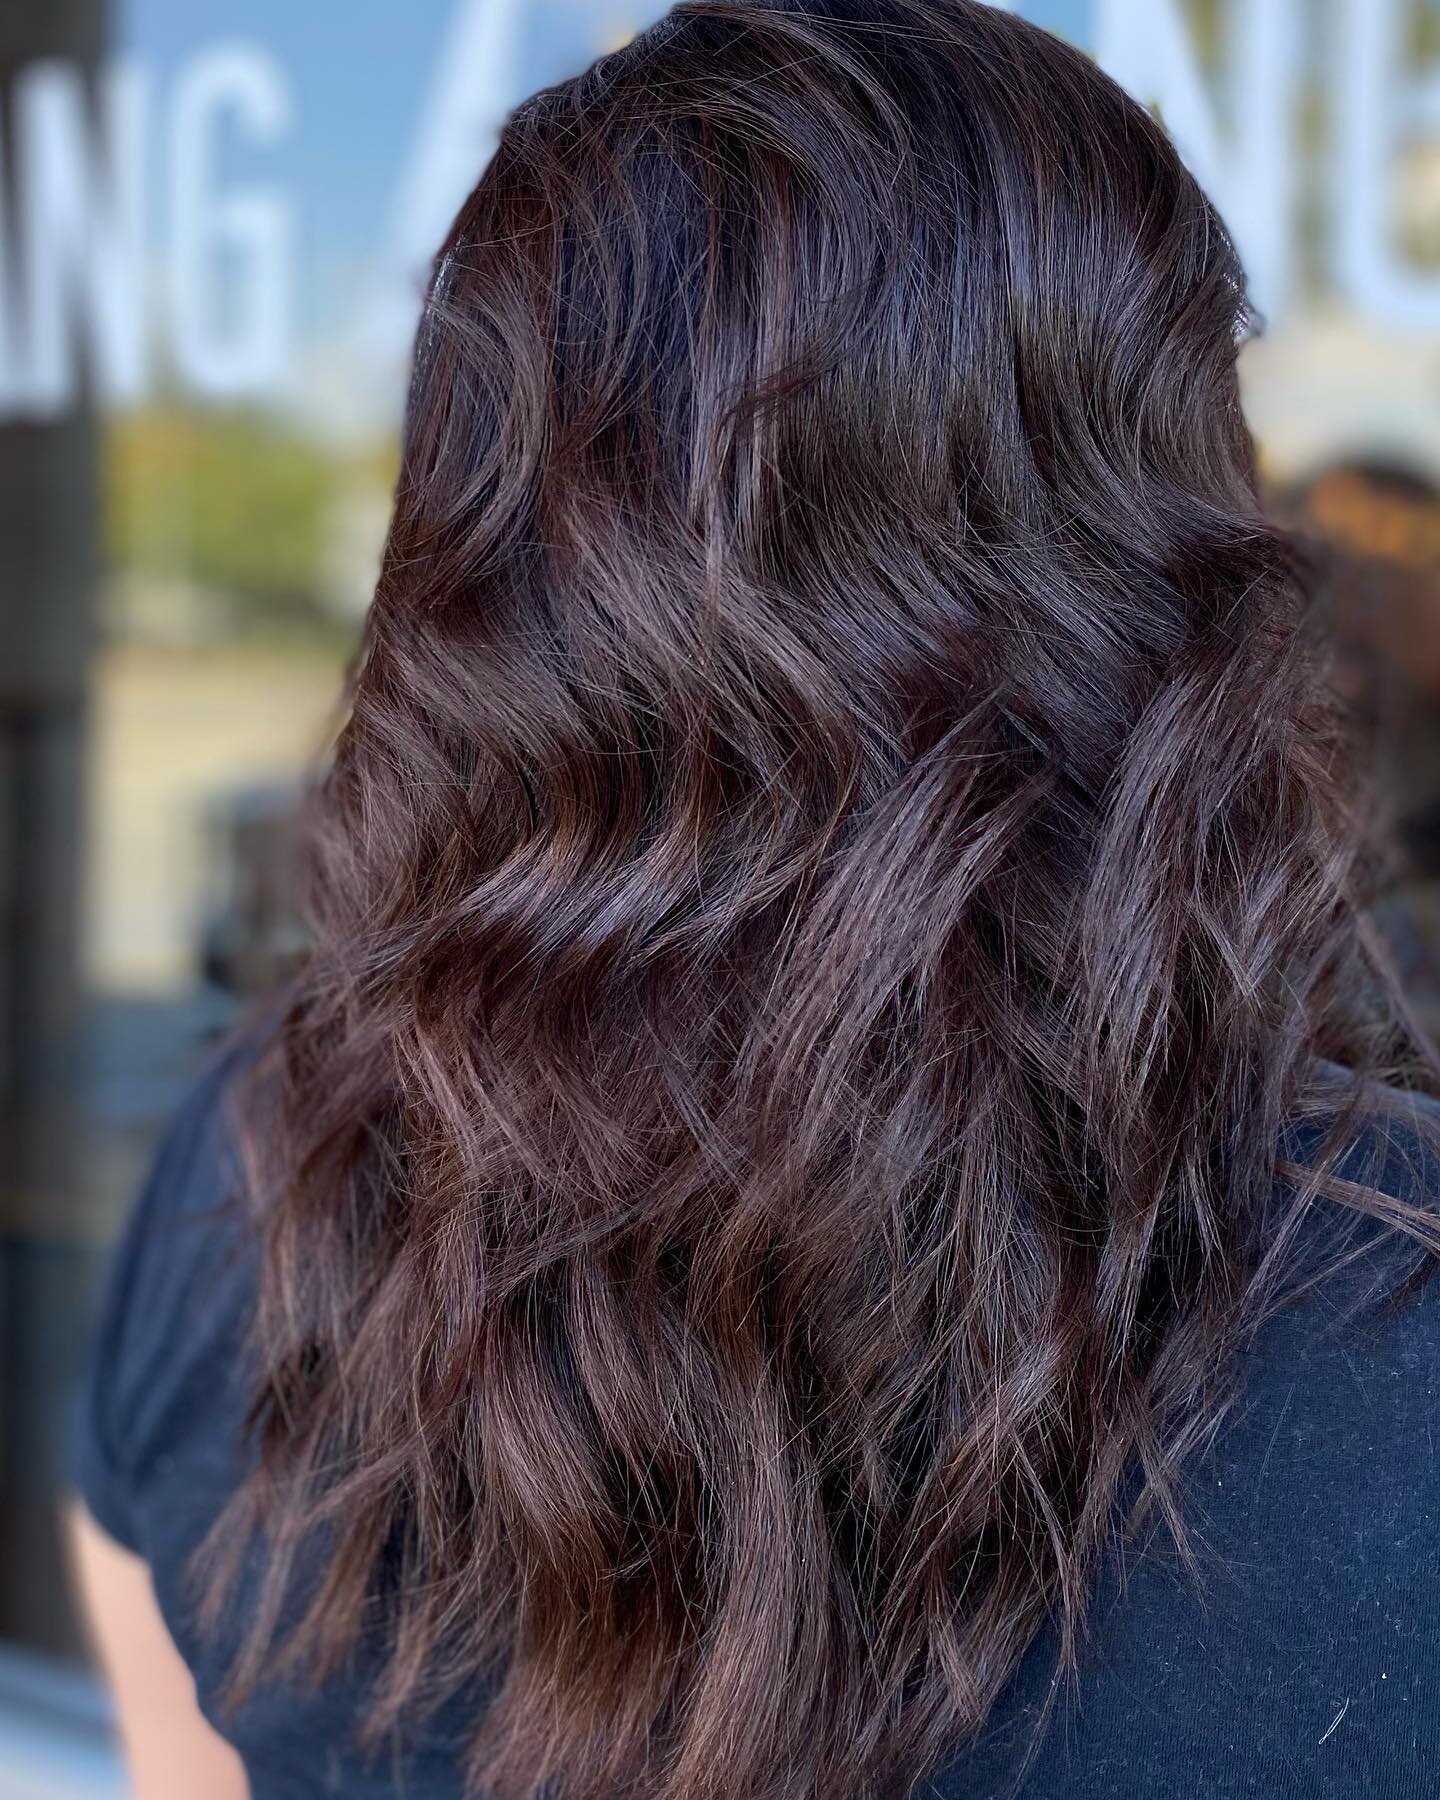 Swipe to see how lighting plays a part in your color! 
@bri_nanna.beauty